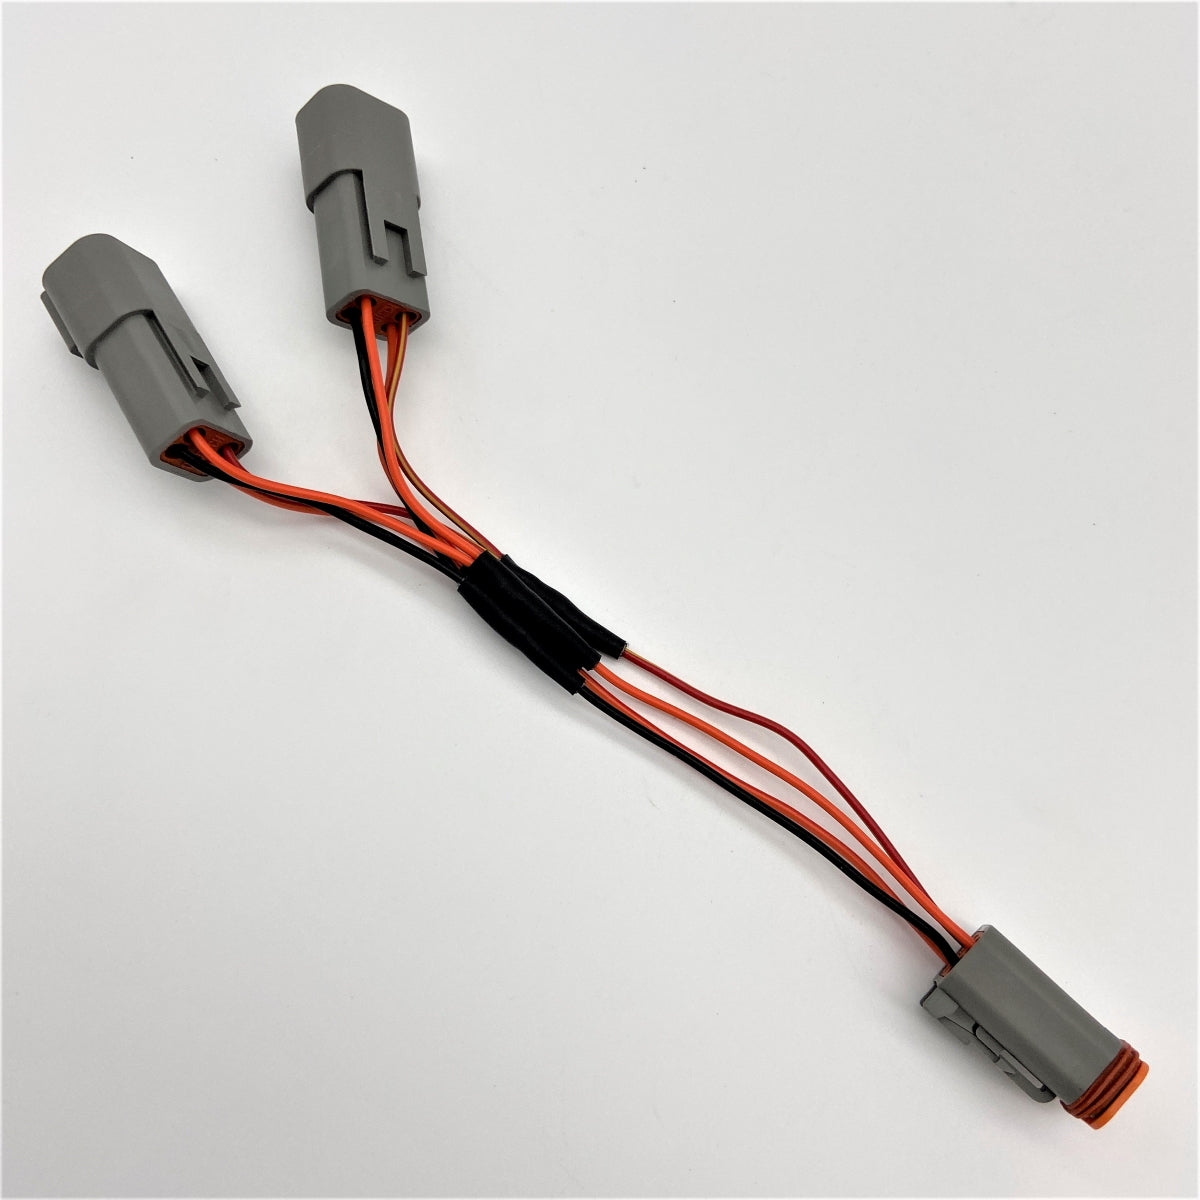 GeezerEngineering Switched Circuit Adapter (4-way Y-Adapter) for Harley